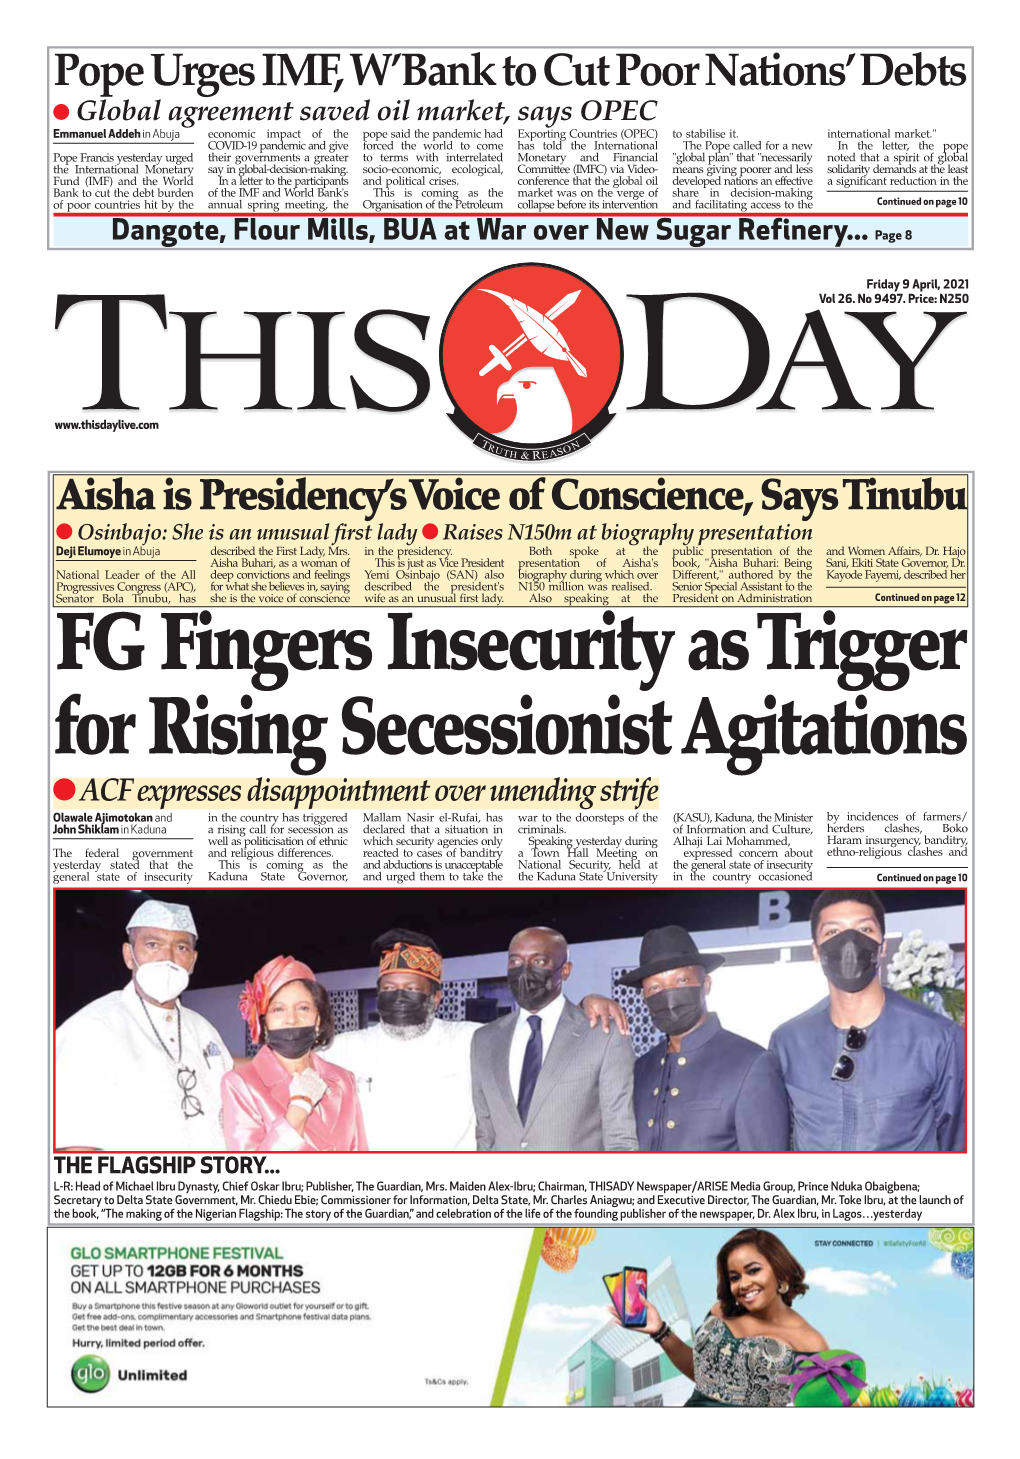 FG Fingers Insecurity As Trigger for Rising Secessionist Agitations